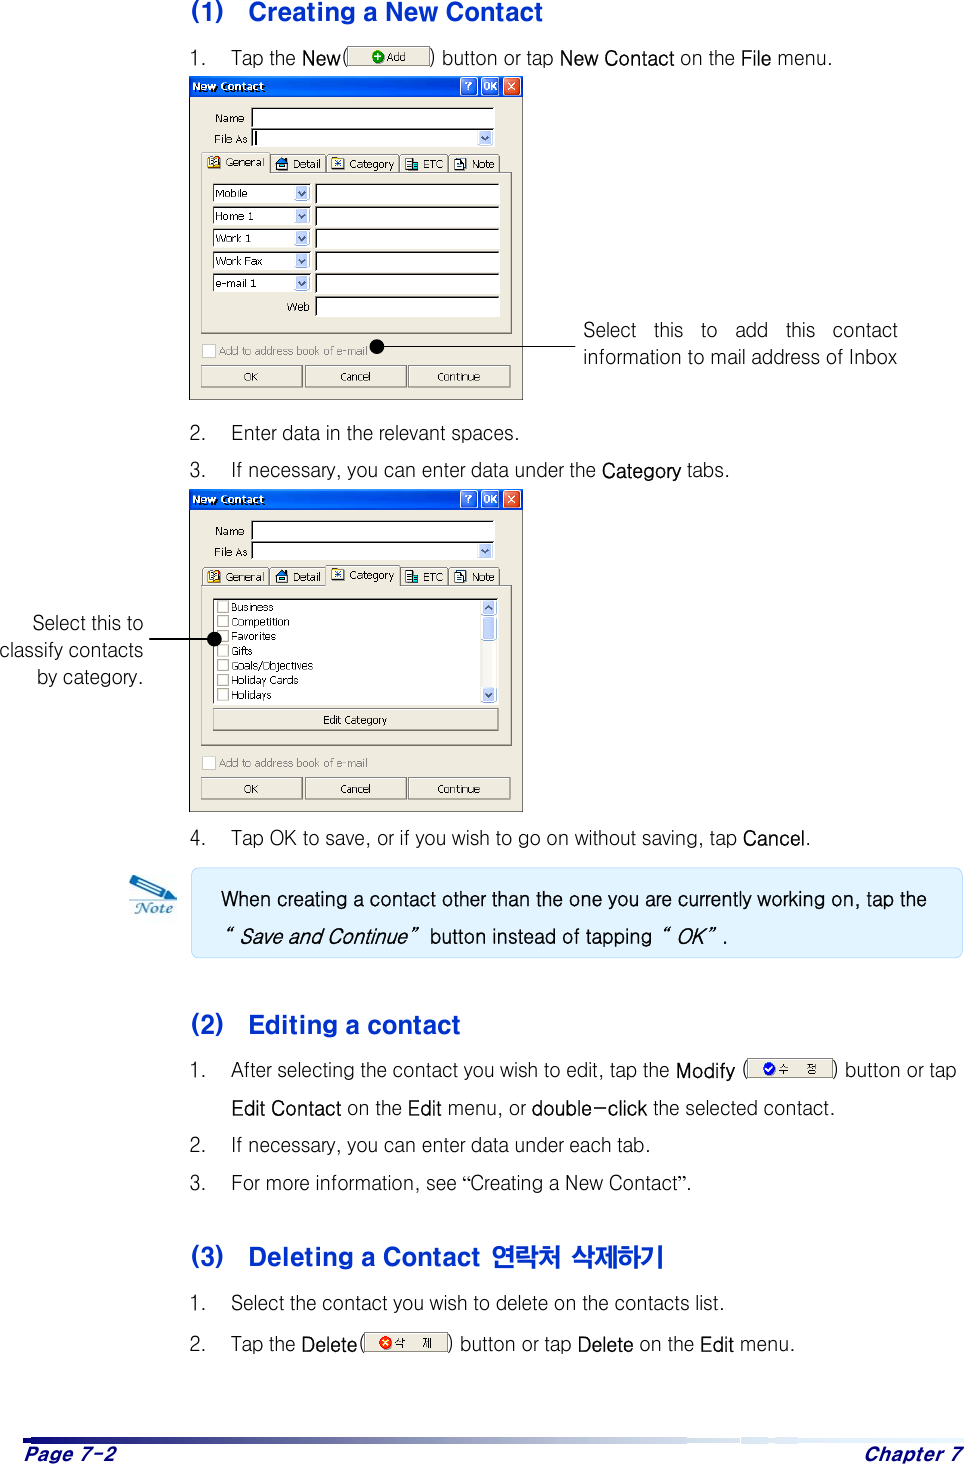 Page 7-2  Chapter 7 (1)  Creating a New Contact 1.  Tap the New() button or tap New Contact on the File menu.           2.  Enter data in the relevant spaces. 3.  If necessary, you can enter data under the Category tabs.         4.  Tap OK to save, or if you wish to go on without saving, tap Cancel.      (2)  Editing a contact 1.  After selecting the contact you wish to edit, tap the Modify ( ) button or tap Edit Contact on the Edit menu, or double-click the selected contact.  2.  If necessary, you can enter data under each tab. 3.  For more information, see “Creating a New Contact”.  (3)  Deleting a Contact  연락처  삭제하기 1.  Select the contact you wish to delete on the contacts list.  2.  Tap the Delete() button or tap Delete on the Edit menu.   Select this to classify contacts by category.Select  this  to  add  this  contactinformation to mail address of Inbox When creating a contact other than the one you are currently working on, tap the “Save and Continue” button instead of tapping “OK”.  